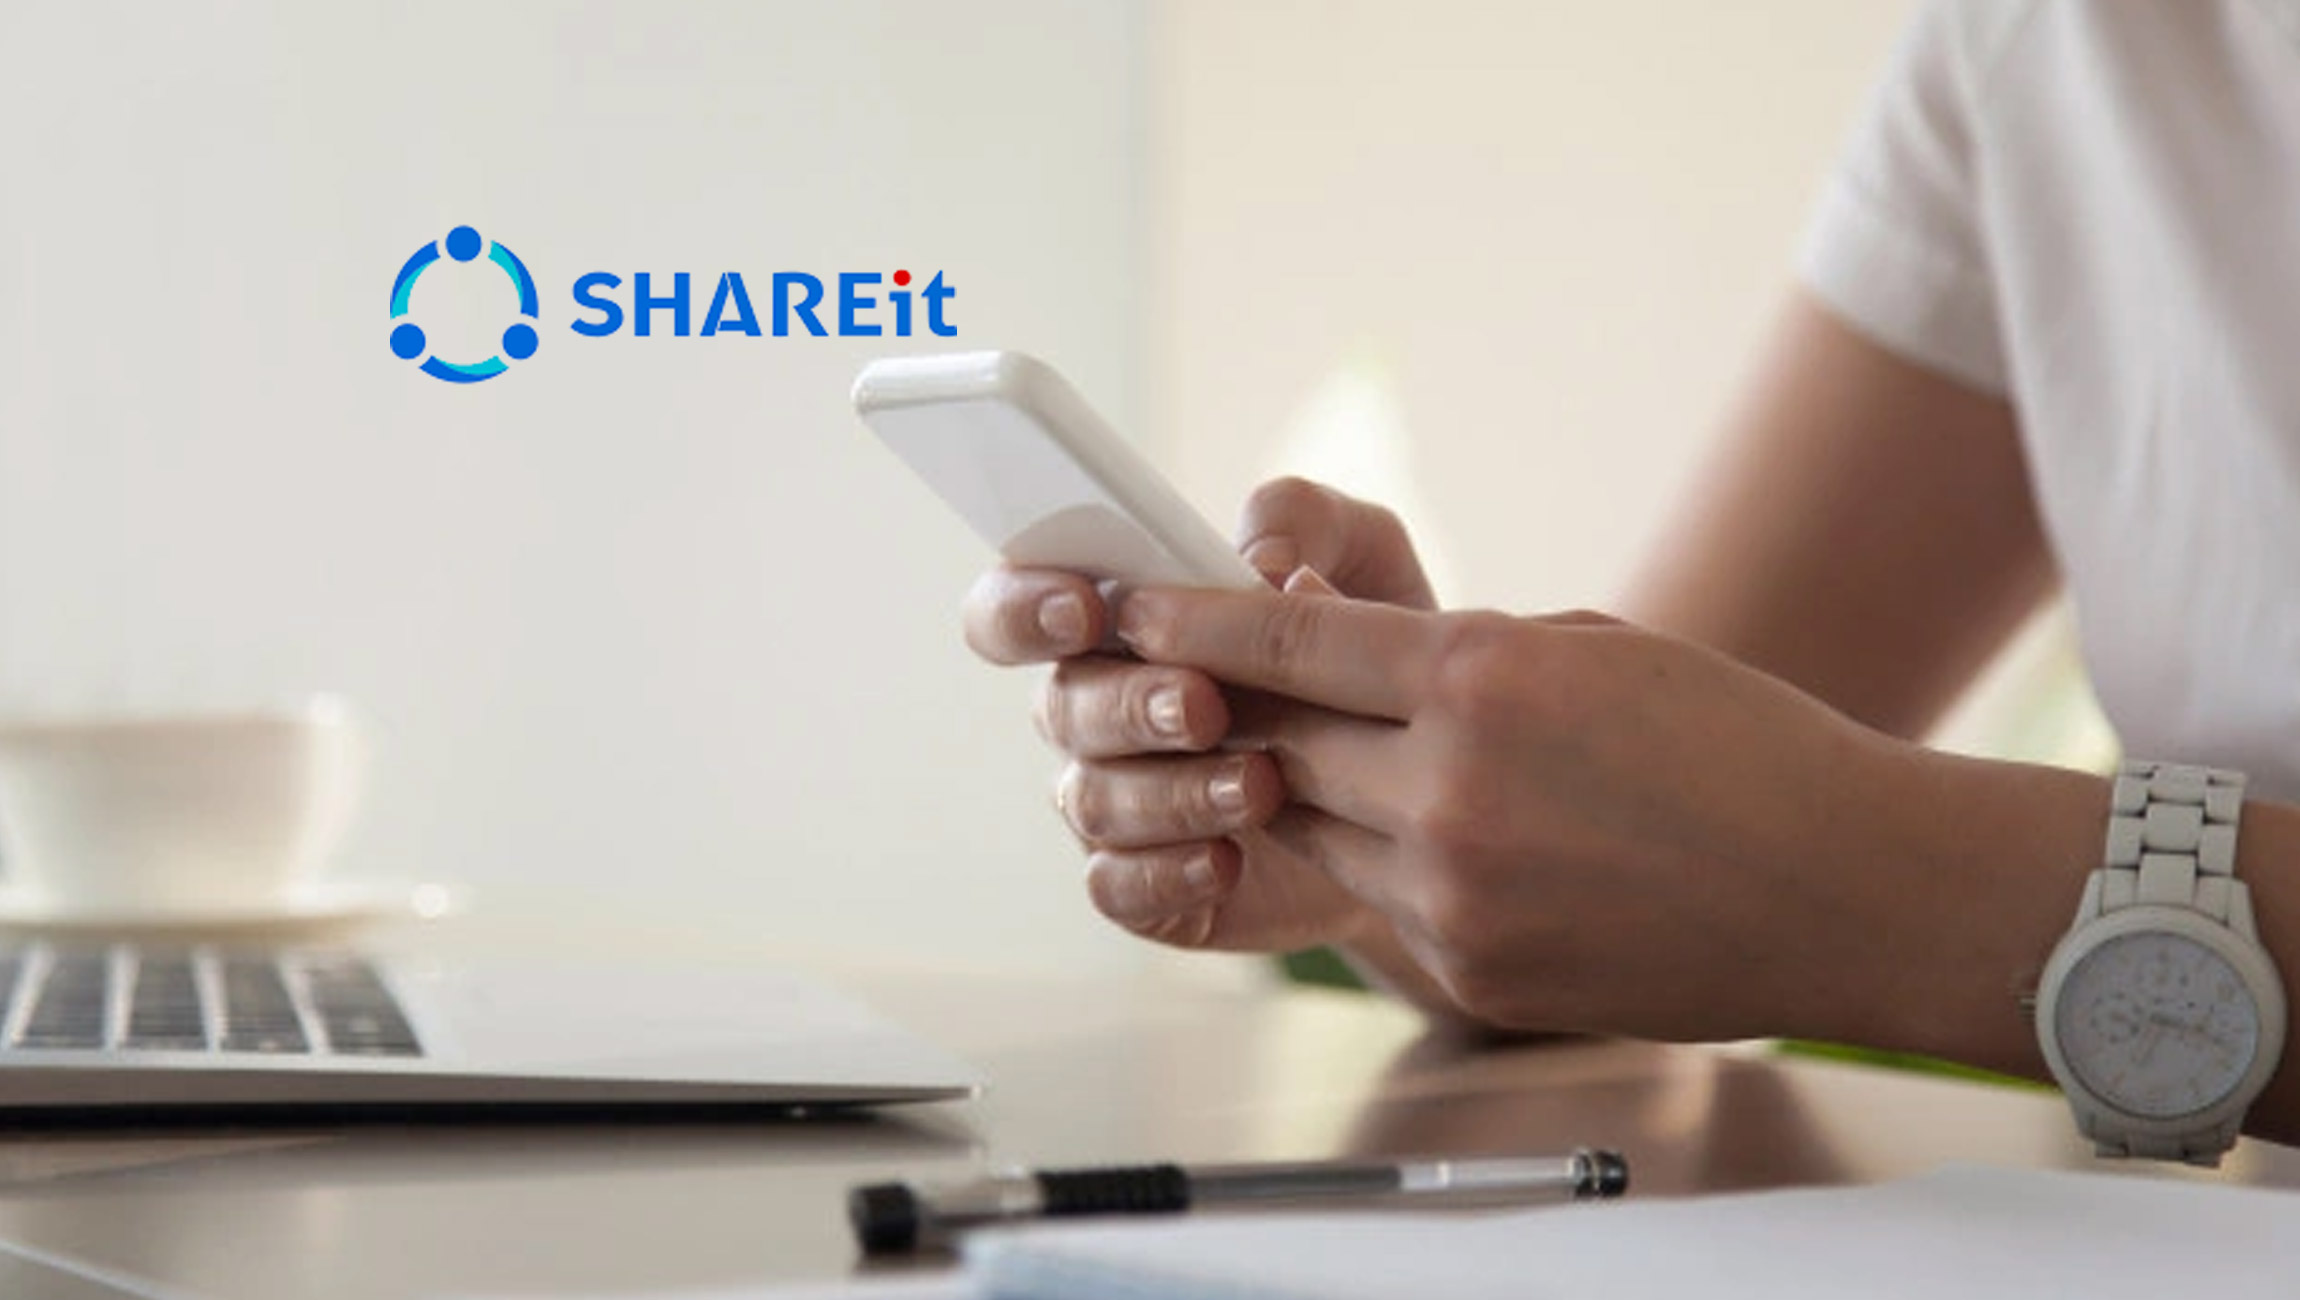 SHAREit Showcases Strong Momentum and Shares the Stage With Top Apps in Southeast Asia